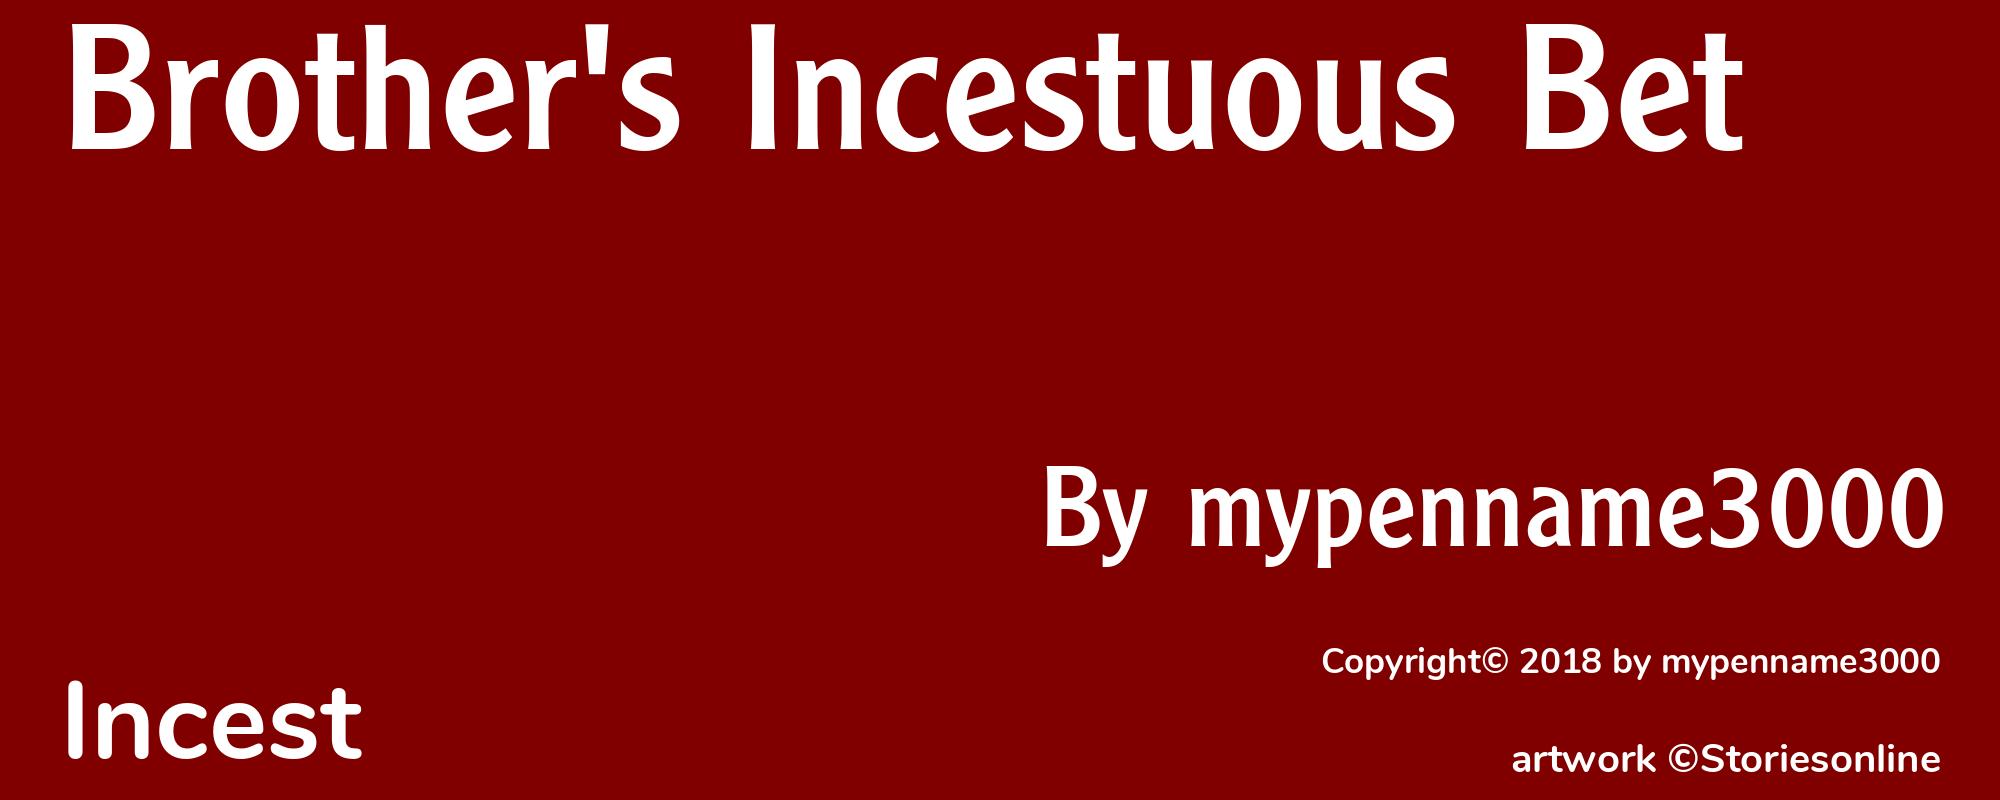 Brother's Incestuous Bet - Cover